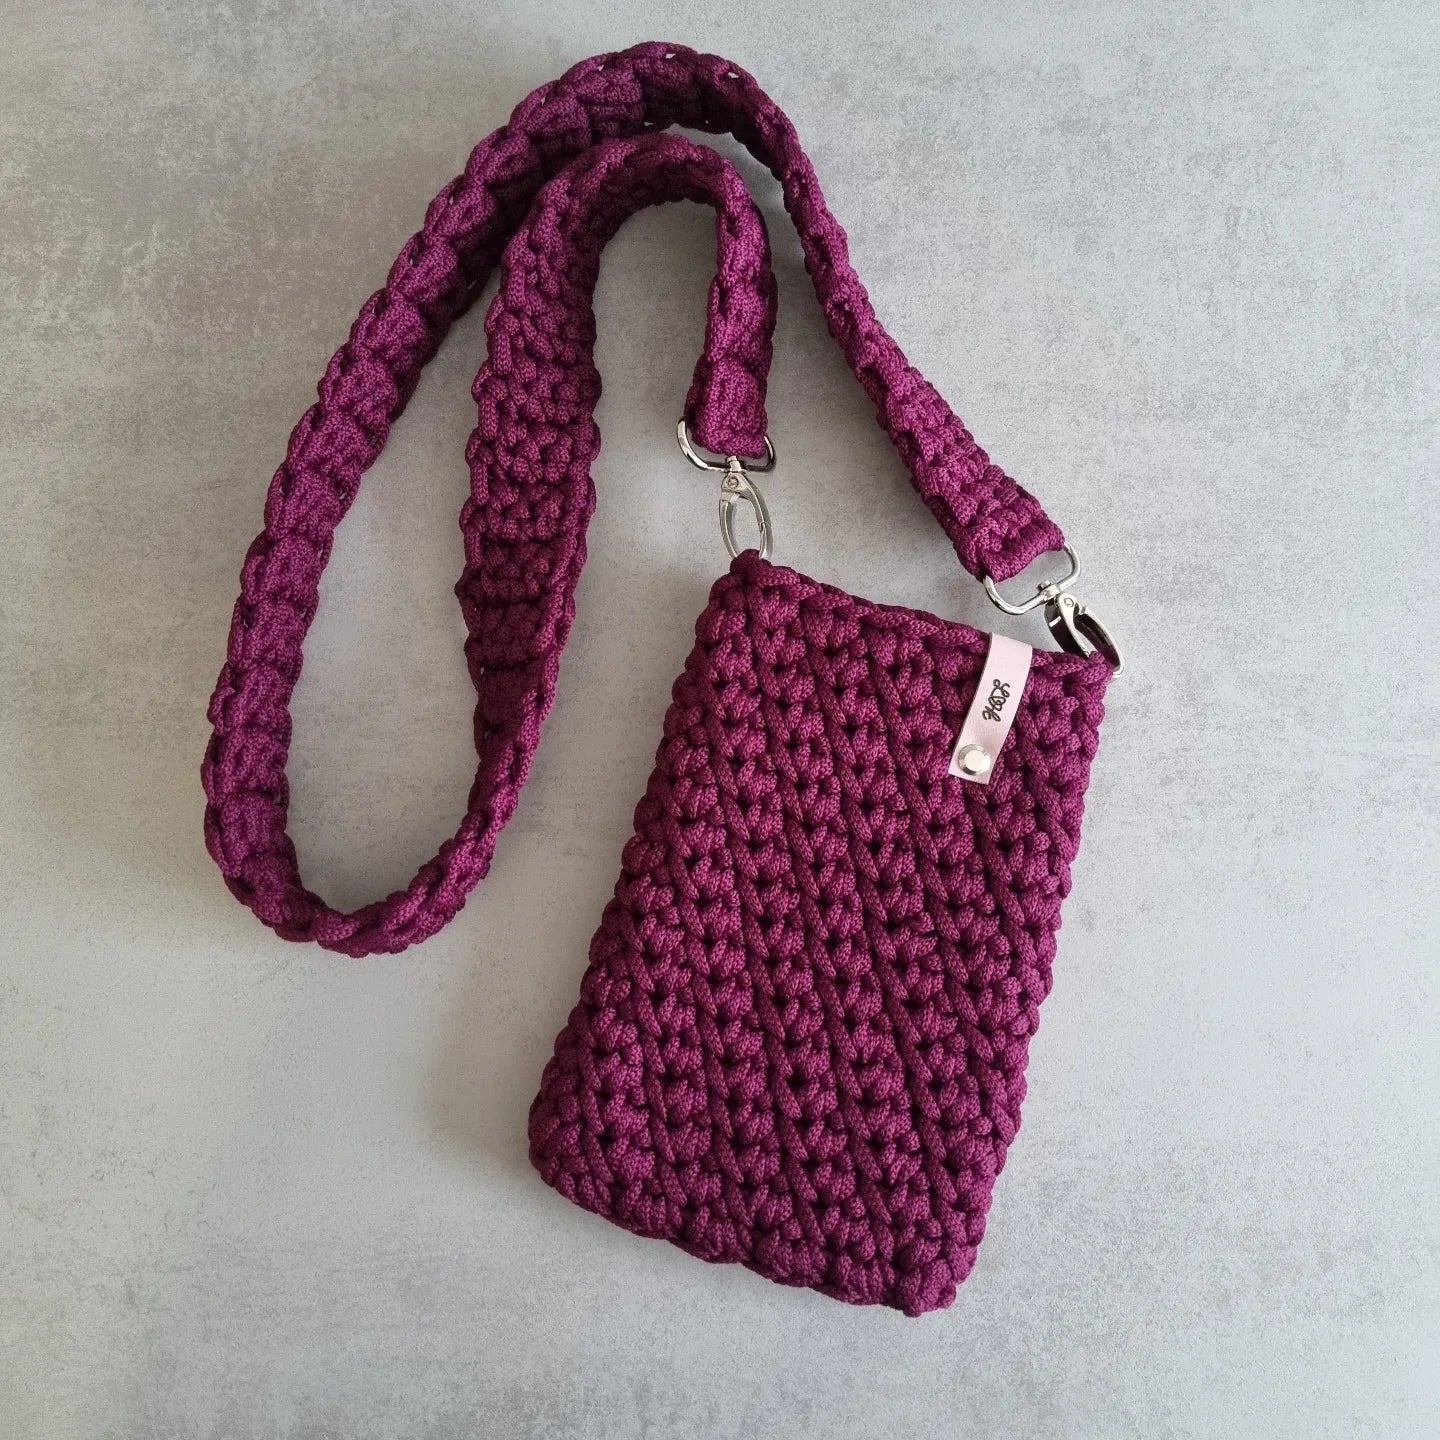 How To Crochet A Tubular Rope Purse Handle, Strap - YouTube